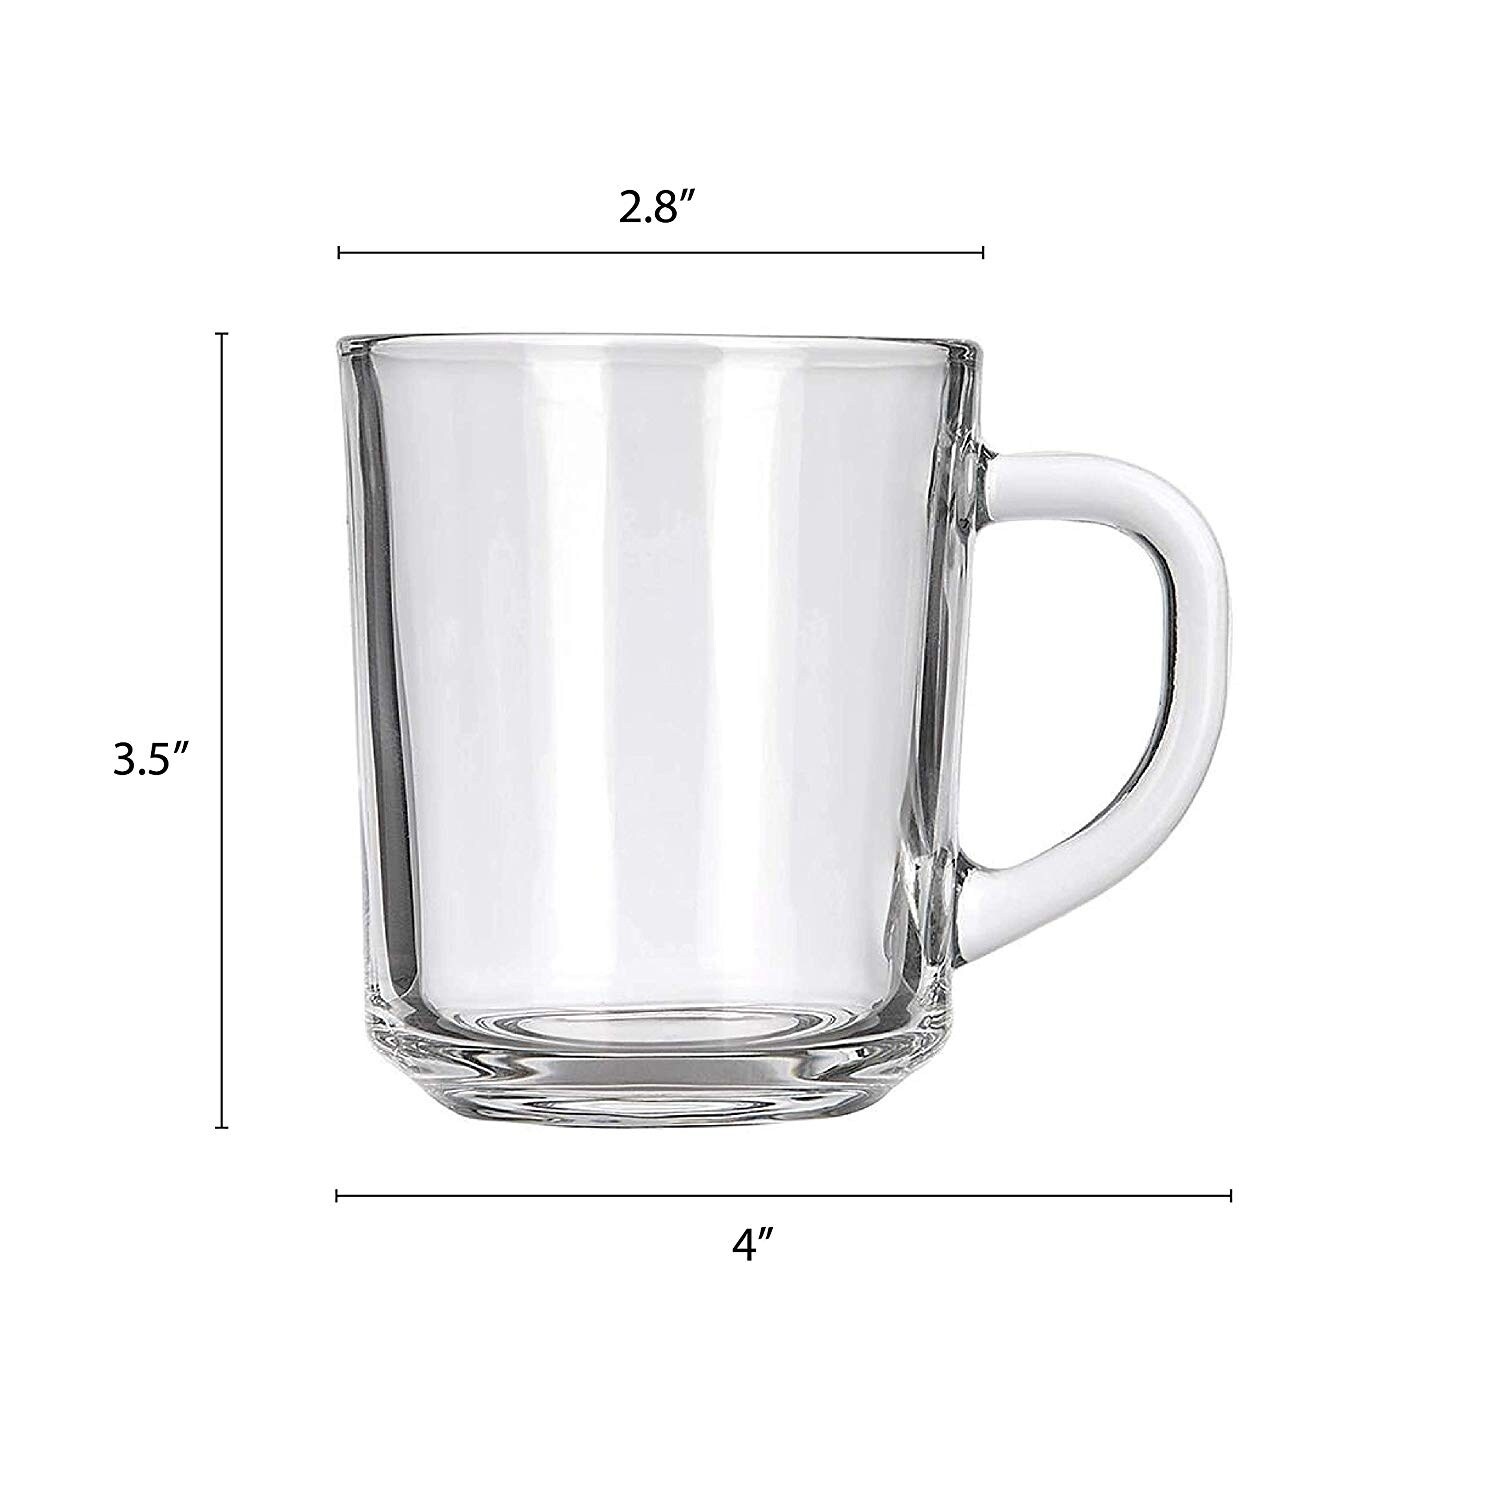 Didaey 8 Pack 8 oz Glass Coffee Mugs Clear Insulated Glass Espresso Coffee  Cups with Handle Cafe Mug…See more Didaey 8 Pack 8 oz Glass Coffee Mugs